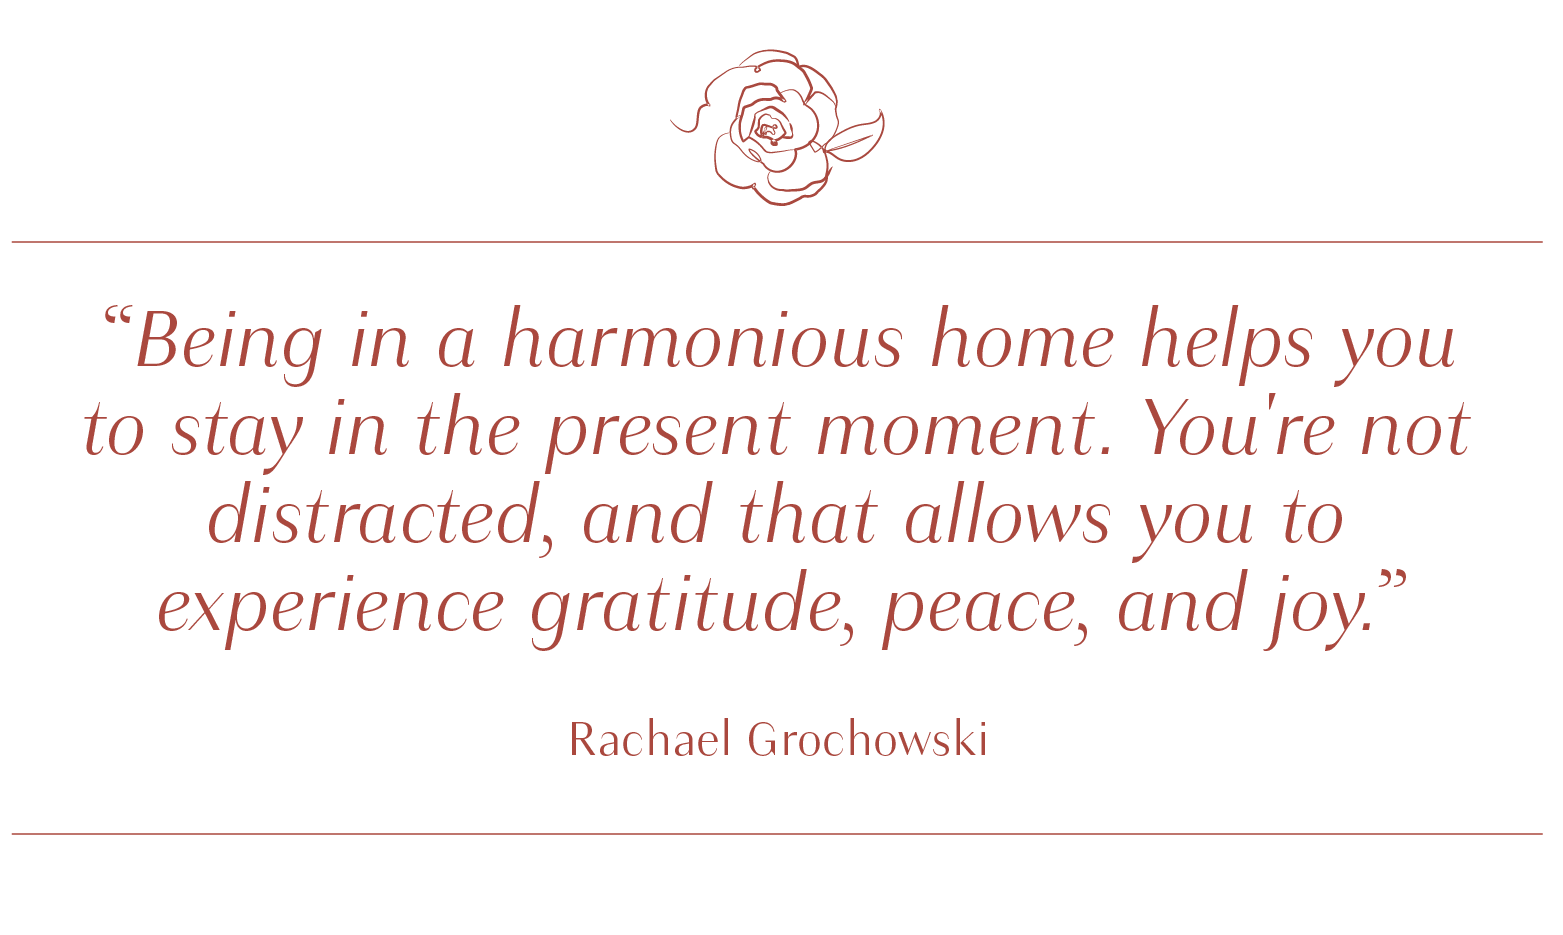 Being in a harmonious home helps you to stay in the present moment. You're not distracted, and that allows you to experience gratitude, peace, and joy. - Rachel Grochowski - large